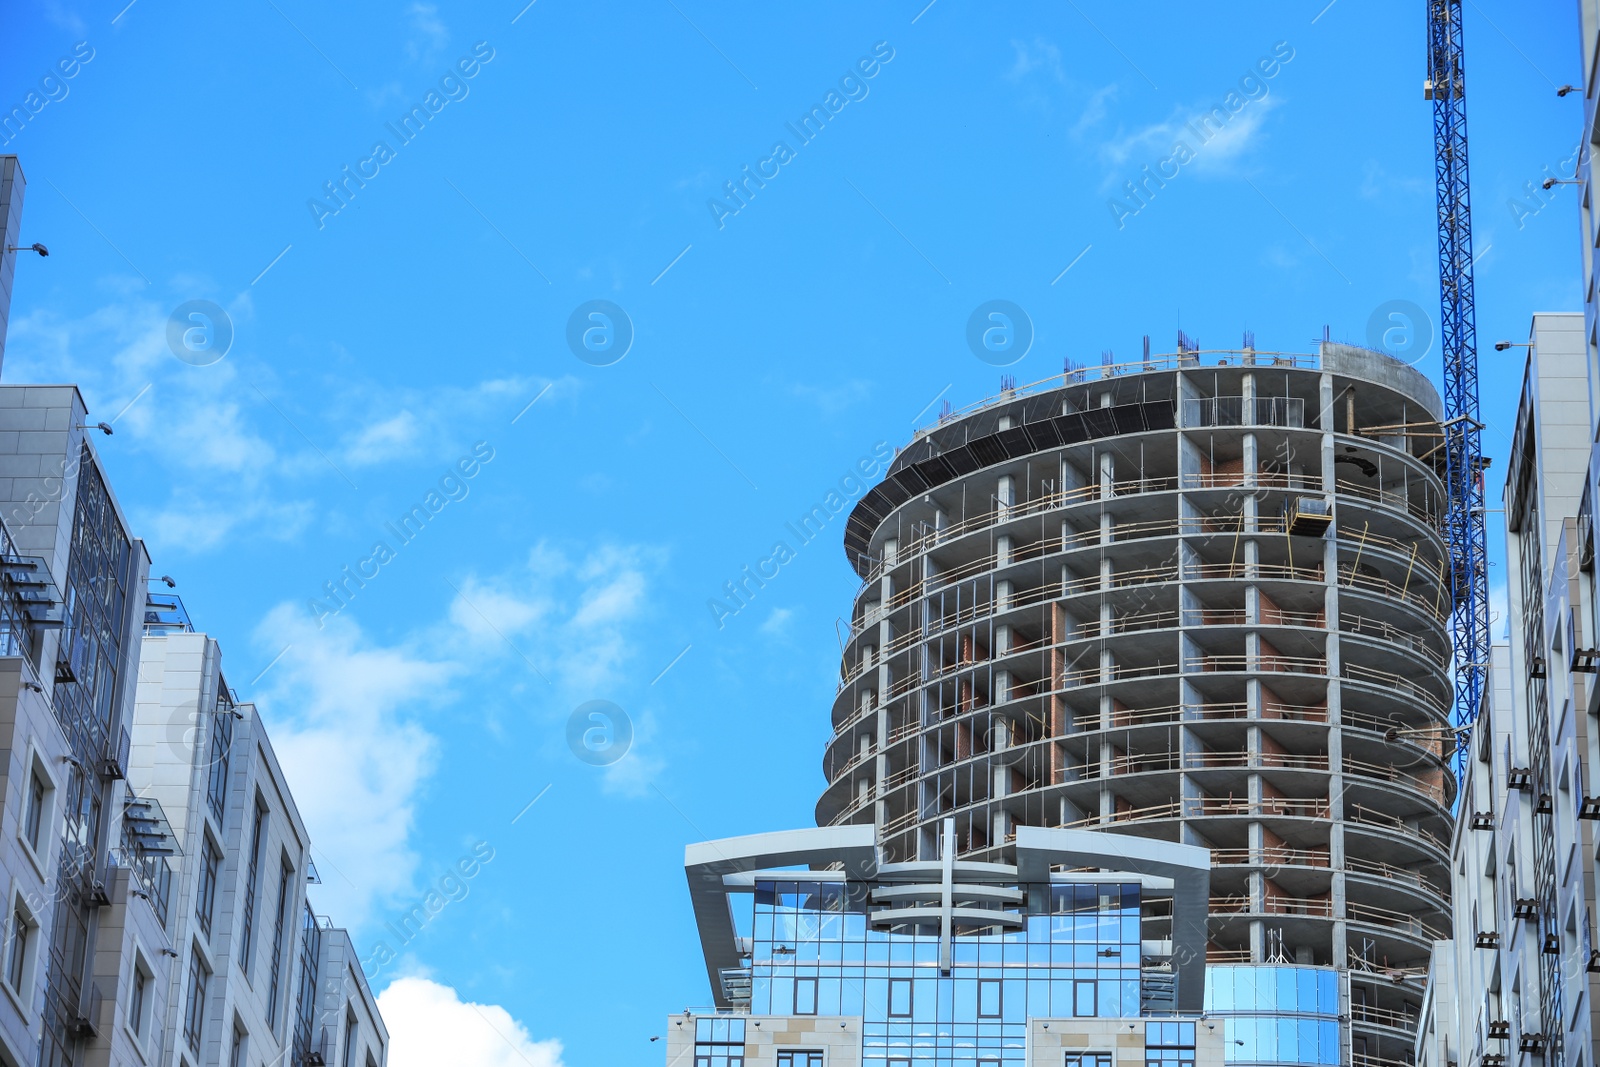 Photo of Unfinished building against blue sky. Construction safety rules